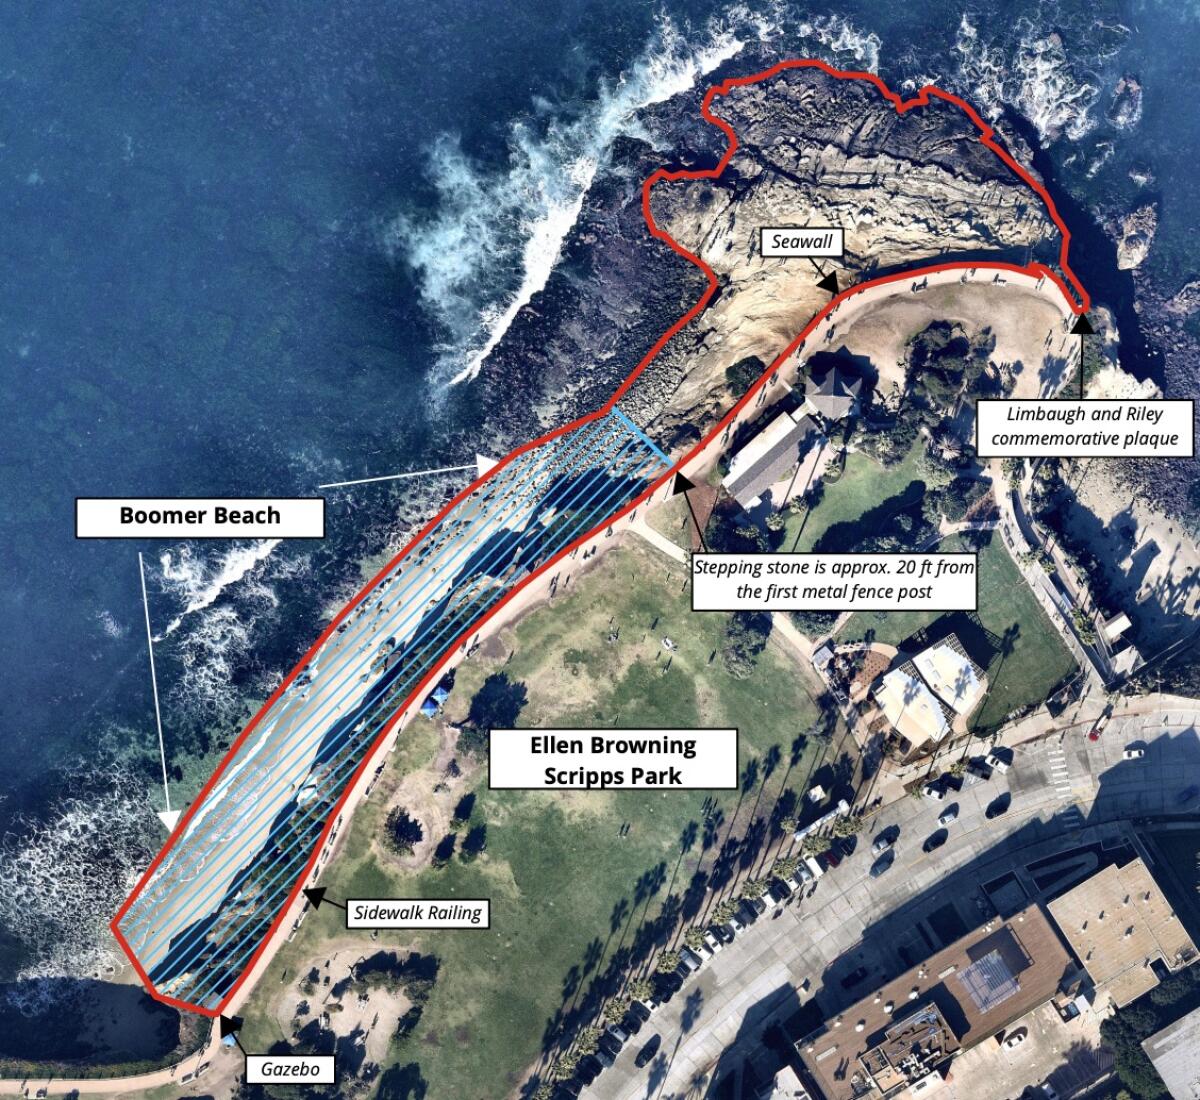 Point La Jolla and Boomer Beach, outlined in red